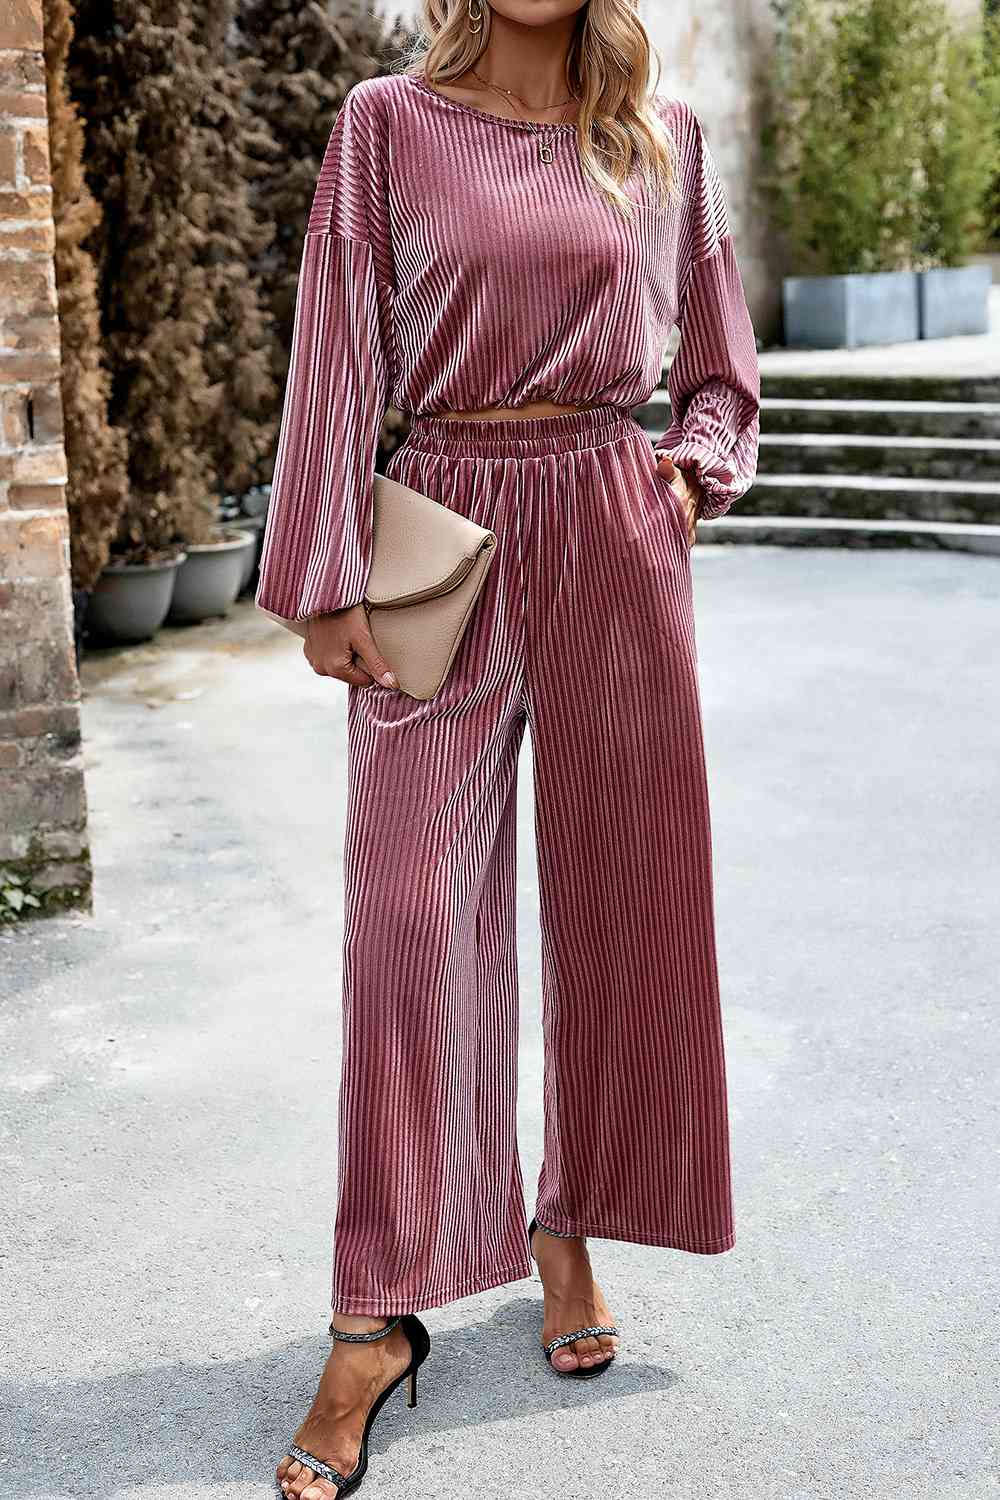 Round Neck Dropped Shoulder Top and Elastic Waist Pants Set